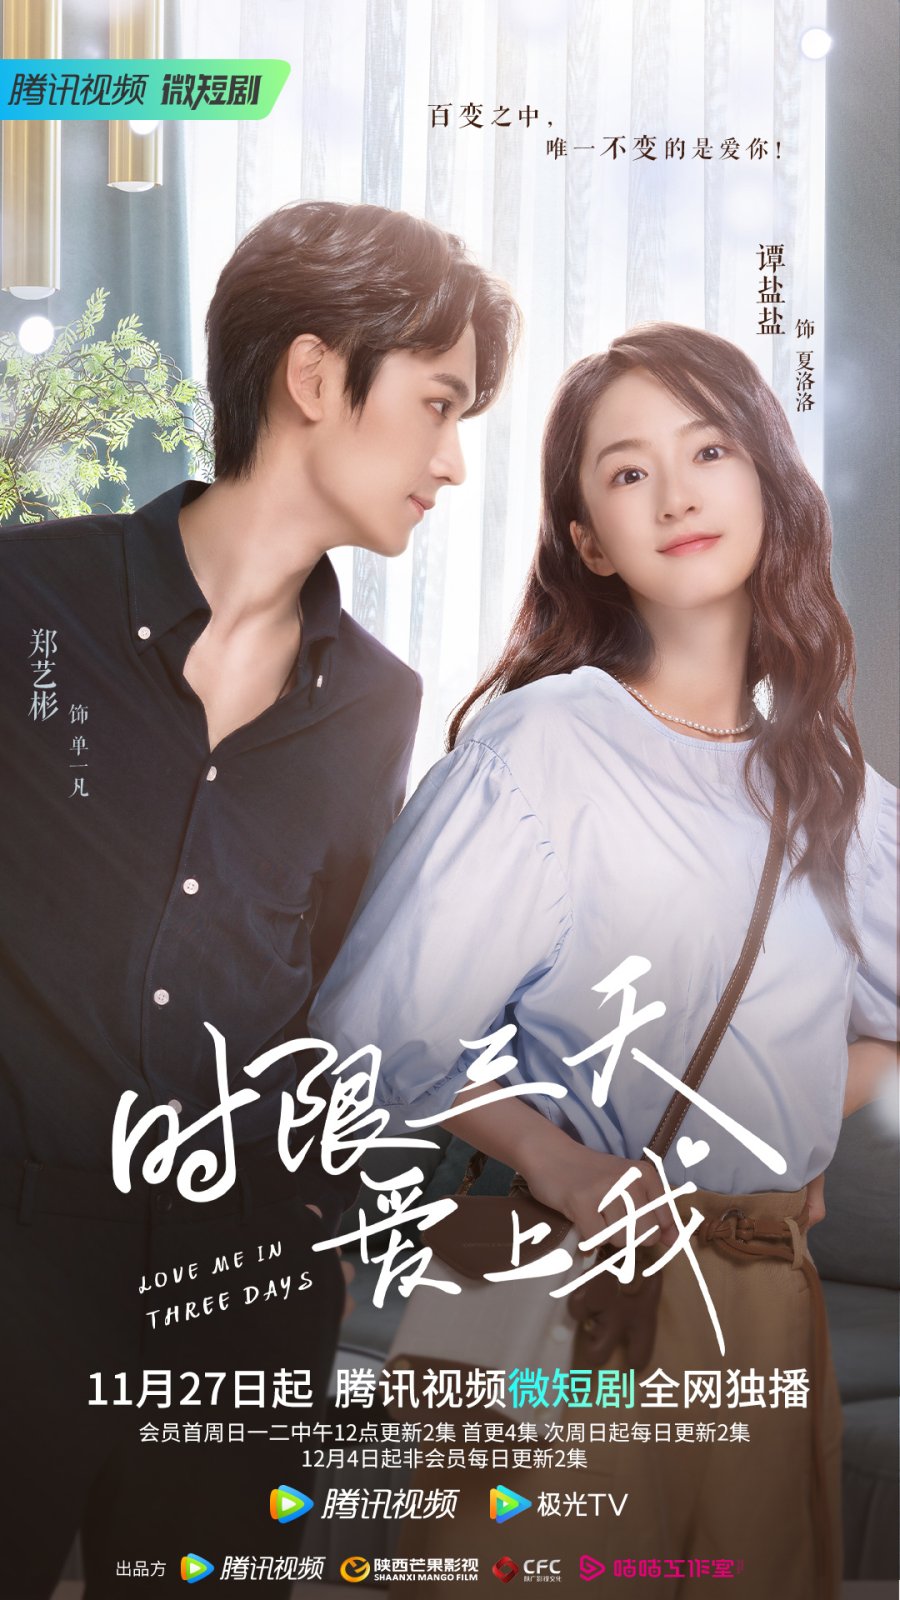 Love the Way You Are (2022) - MyDramaList